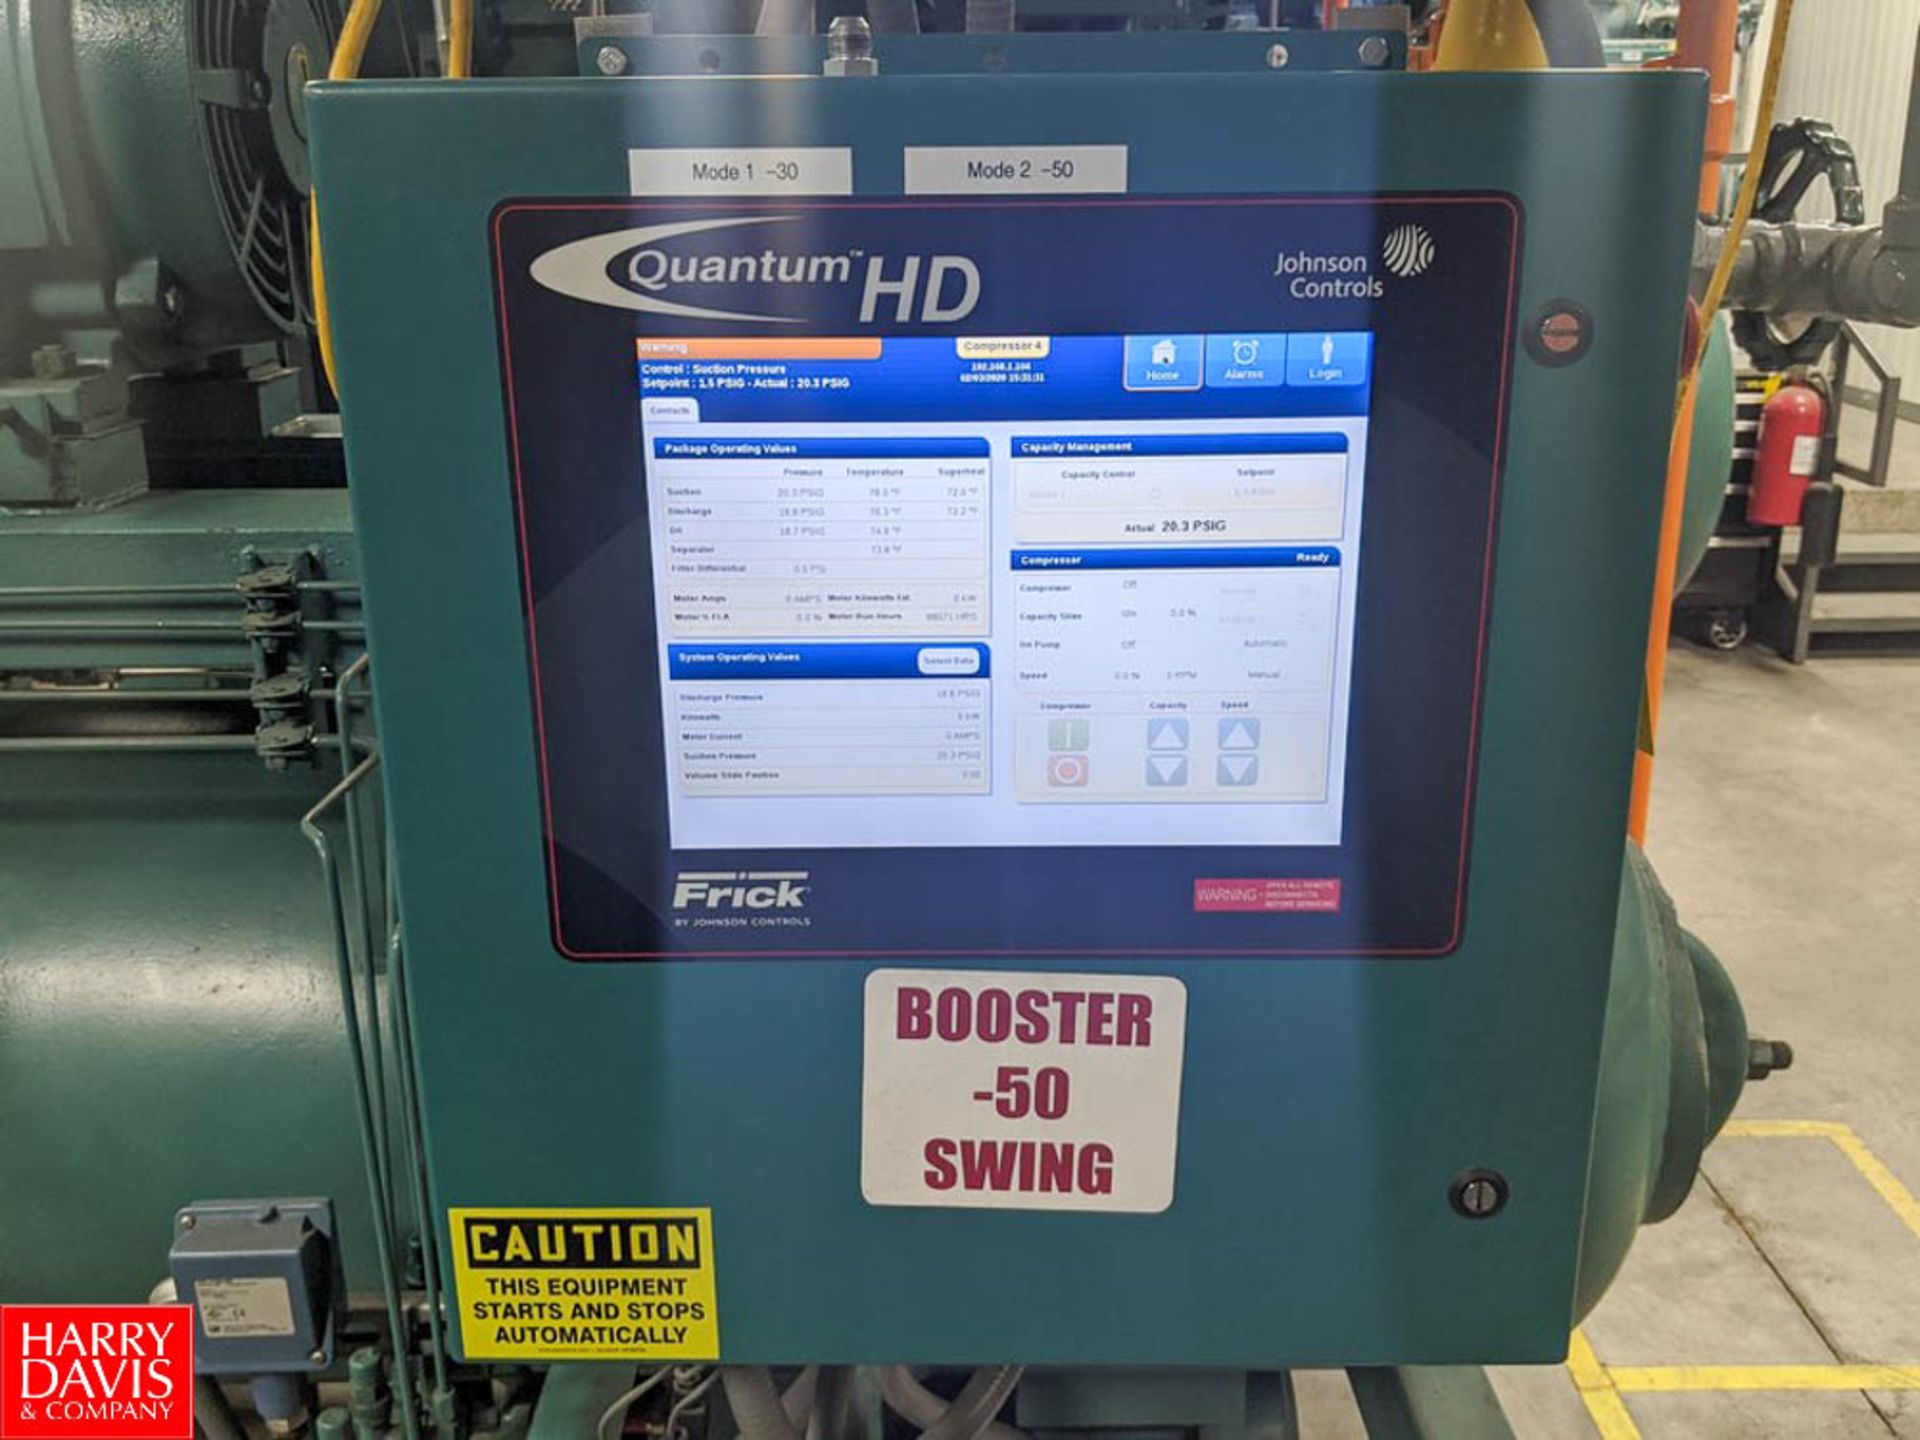 Frick 100 HP Ammonia Screw Compressor Model RDB 177 : SN S0073NFMCLHAA3, with Quantum HD Touch - Image 3 of 12